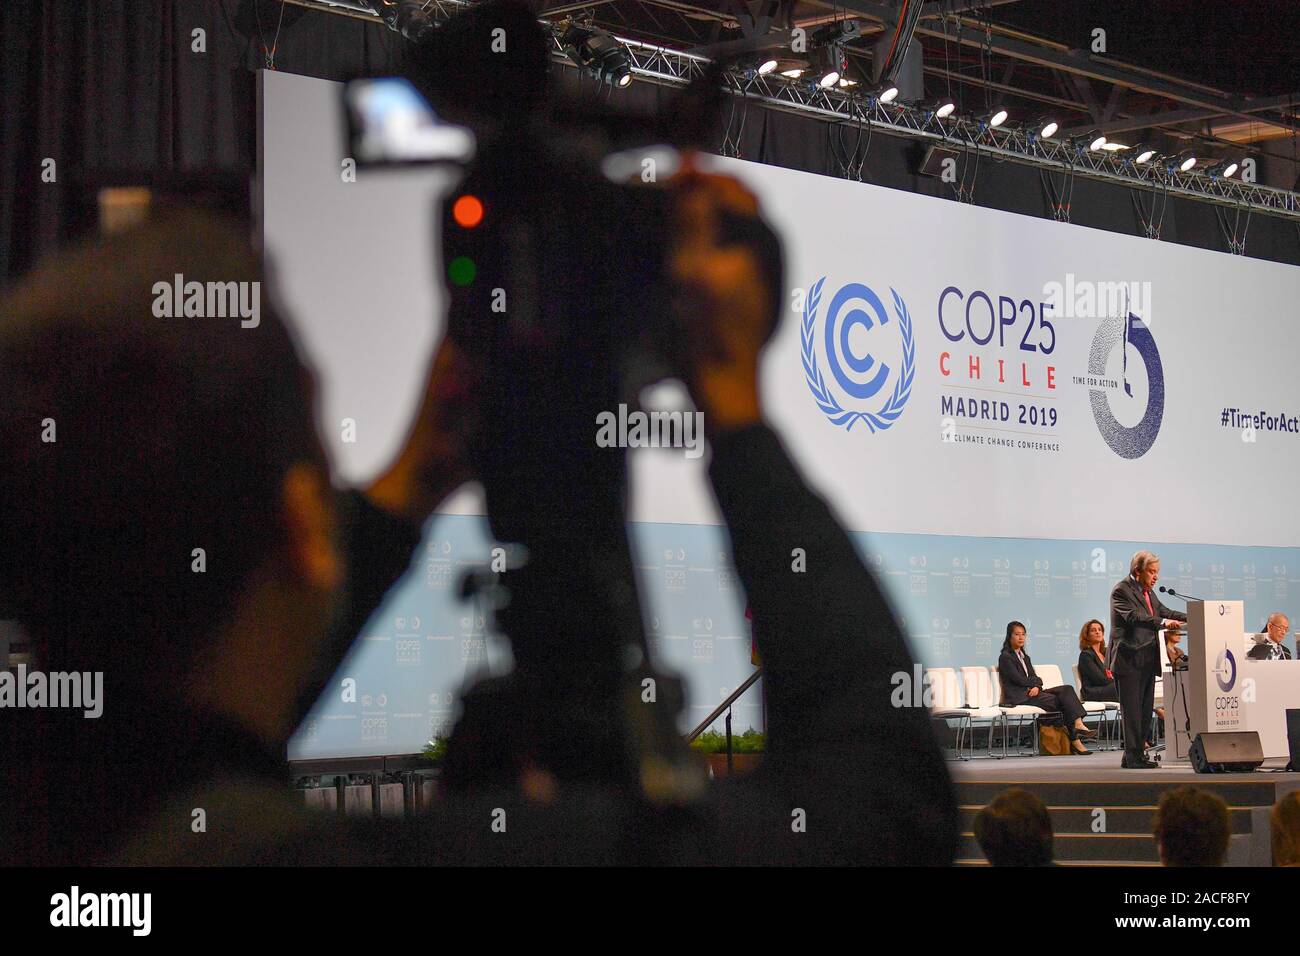 *** STRICTLY NO SALES TO FRENCH MEDIA OR PUBLISHERS *** December 02, 2019 - Madrid, Spain: Journalists attend the opening ceremony of the COP25 climate conference in Madrid. Stock Photo